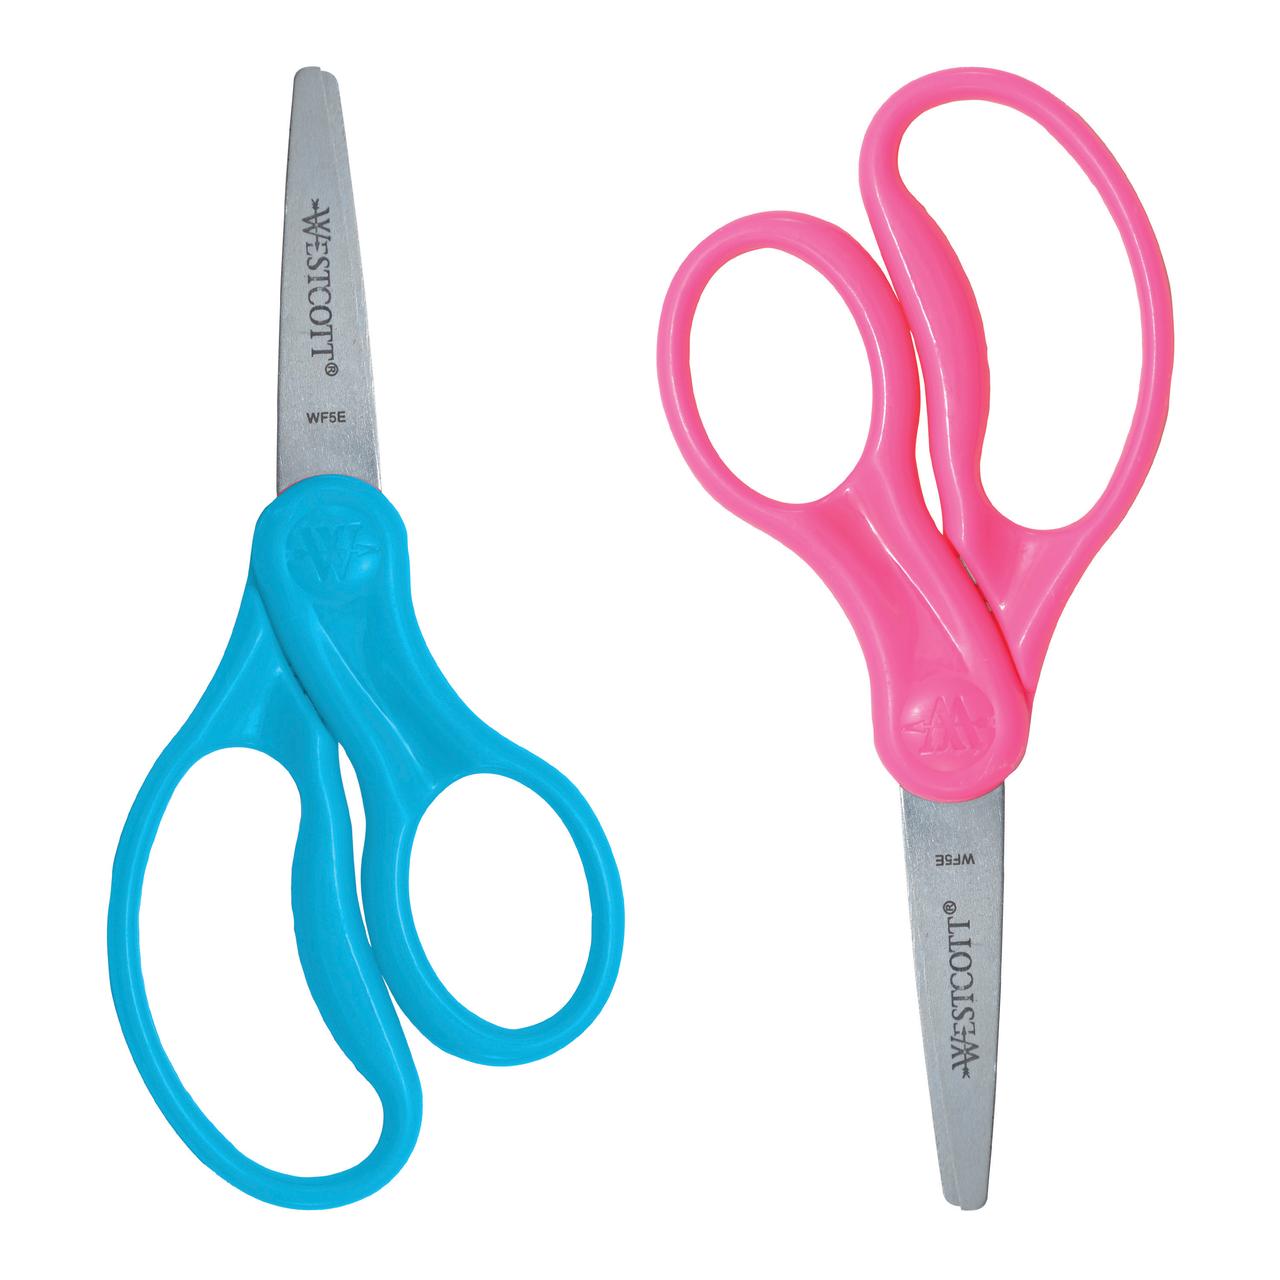 Westcott® Hard Handle Kids Value Scissors, 5", Pointed, Assorted Colors, 2 Pack - image 2 of 9